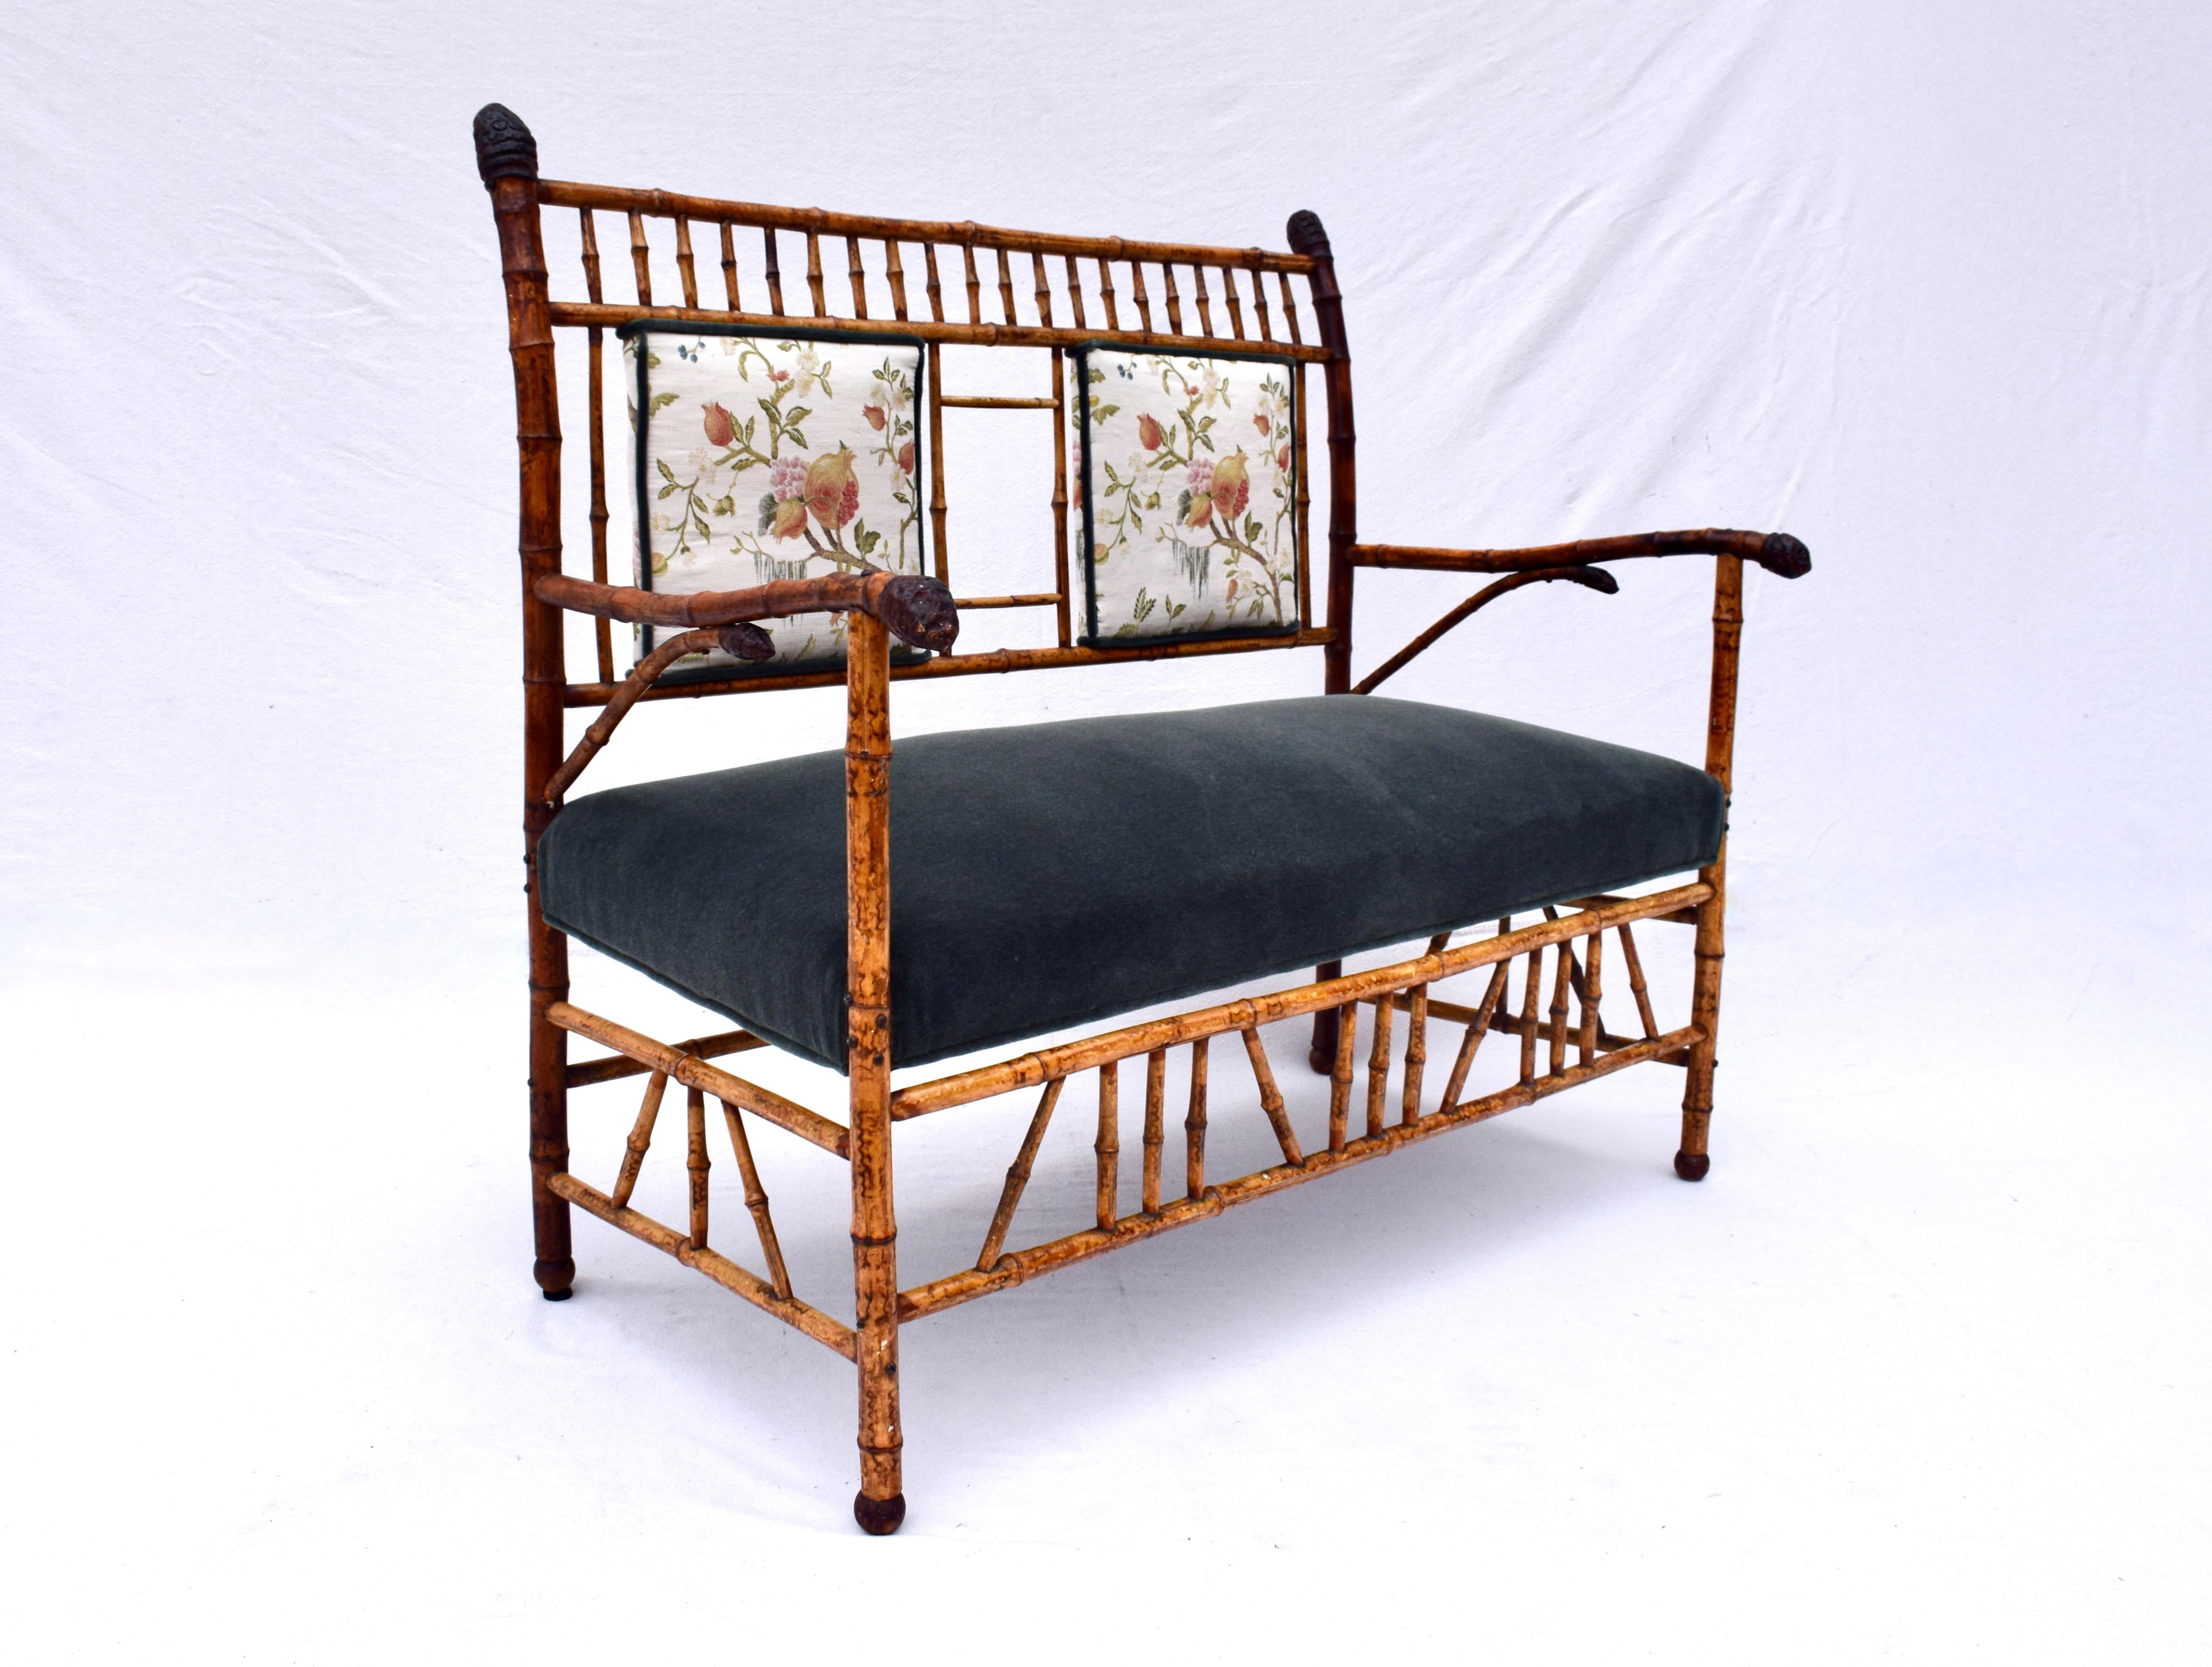 Aesthetic Movement Tortoise bamboo settee carefully curated to emulate Japanned bamboo furniture of the period, in the dark forest green Mohair upholstered seat & Scalamandre embroidered fruits; front and back panels.  Fully restored ready for